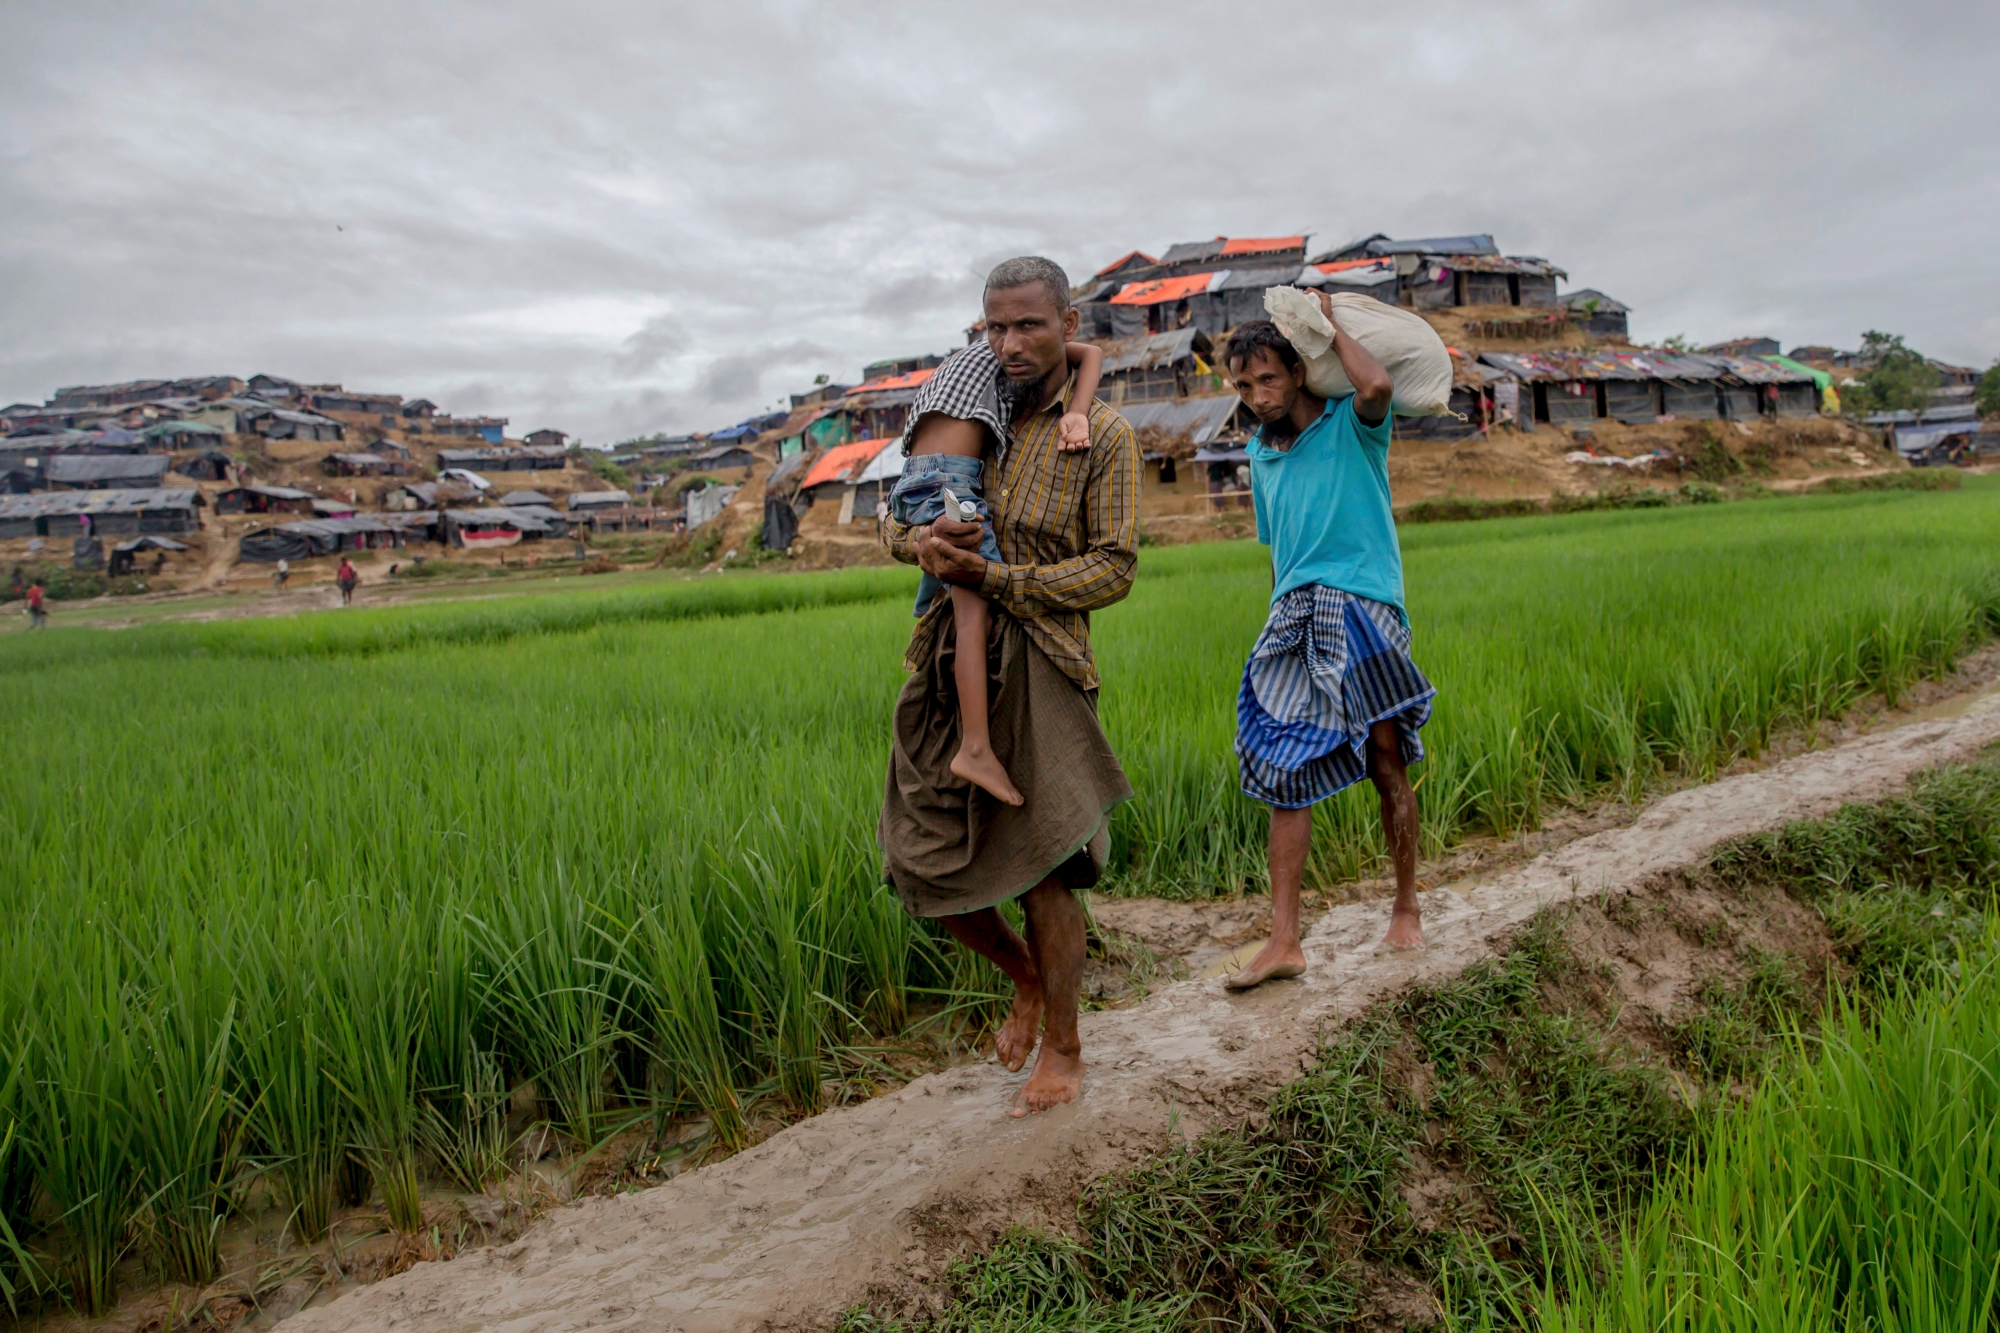 A Rohingya Muslim, who crossed over from Myanmar into Bangladesh, walks back to his shelter after taking his son to a doctor at a nearby clinic in Balukhali refugee camp, Bangladesh, Monday, Sept. 18, 2017. Bangladesh has been overwhelmed with more than 400,000 Rohingya who fled their homes in the last three weeks amid a crisis the U.N. describes as ethnic cleansing. Refugee camps were already beyond capacity and new arrivals were staying in schools or huddling in makeshift settlements with no toilets along roadsides and in open fields. (AP Photo/Dar Yasin) Bangladesh Myanmar Attacks